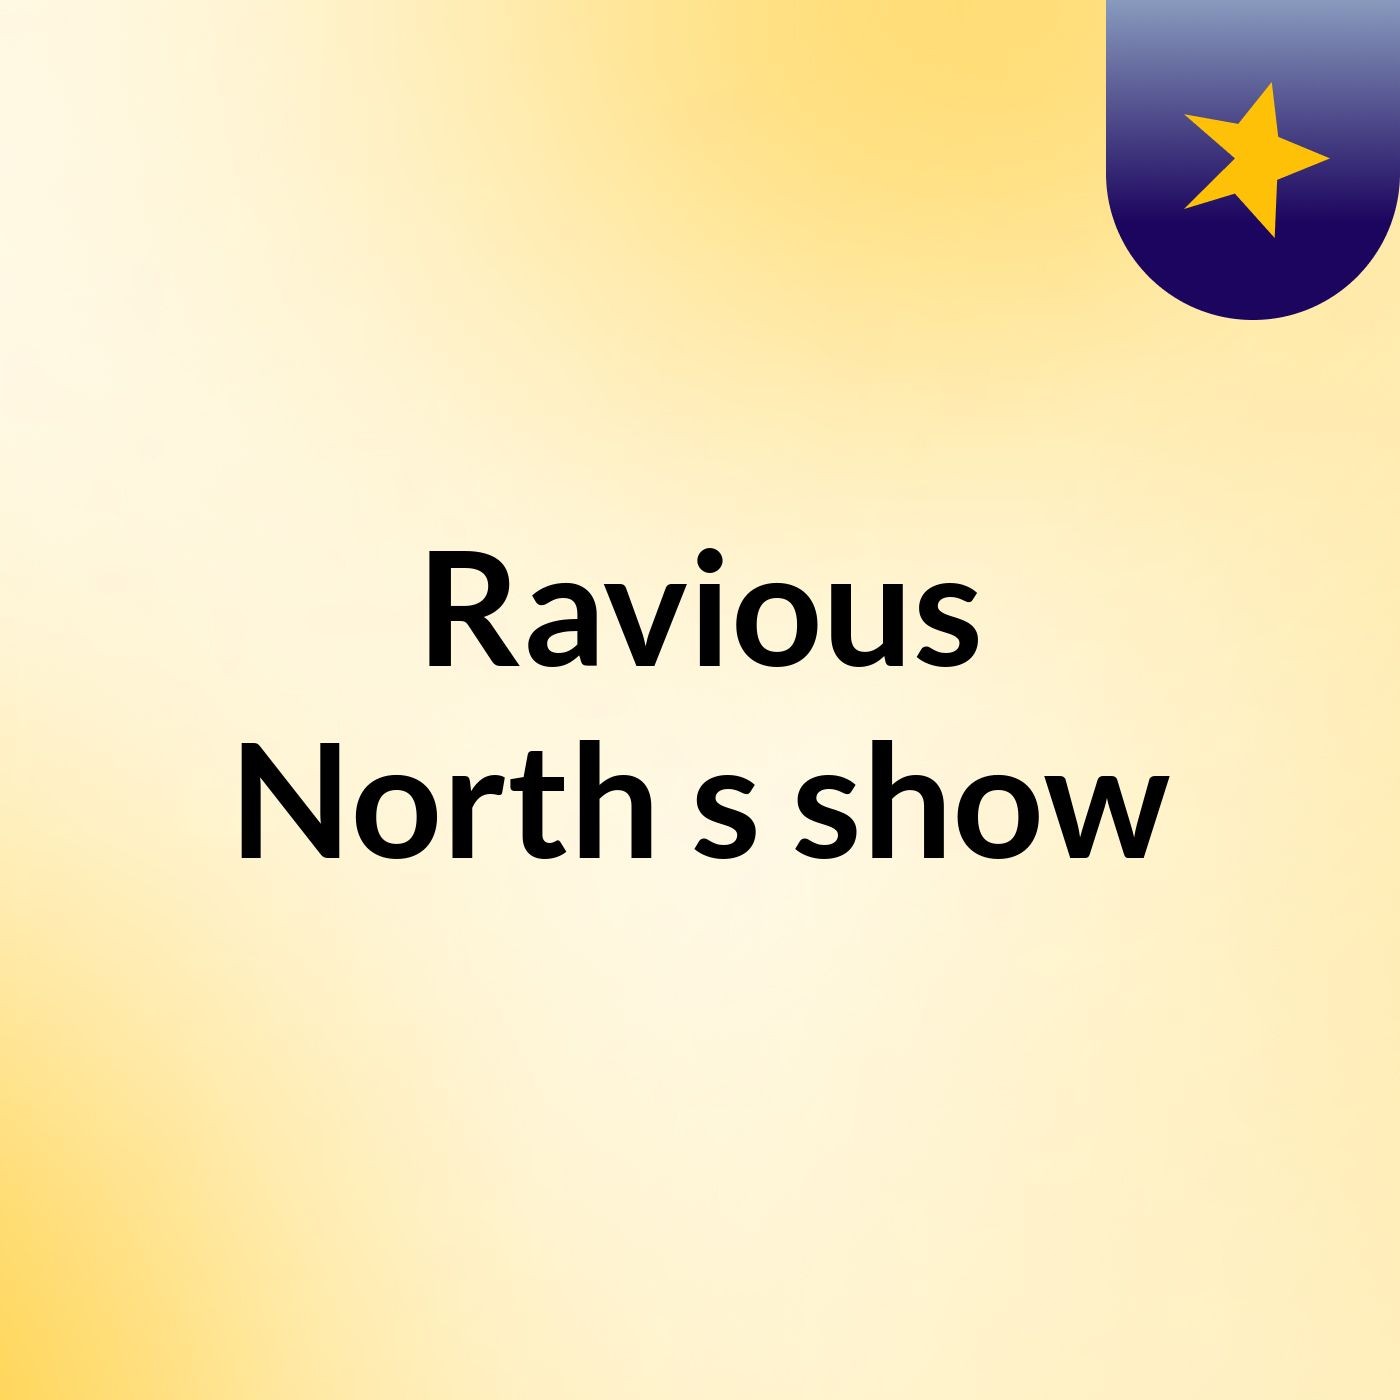 Episode 3 - Ravious North's show